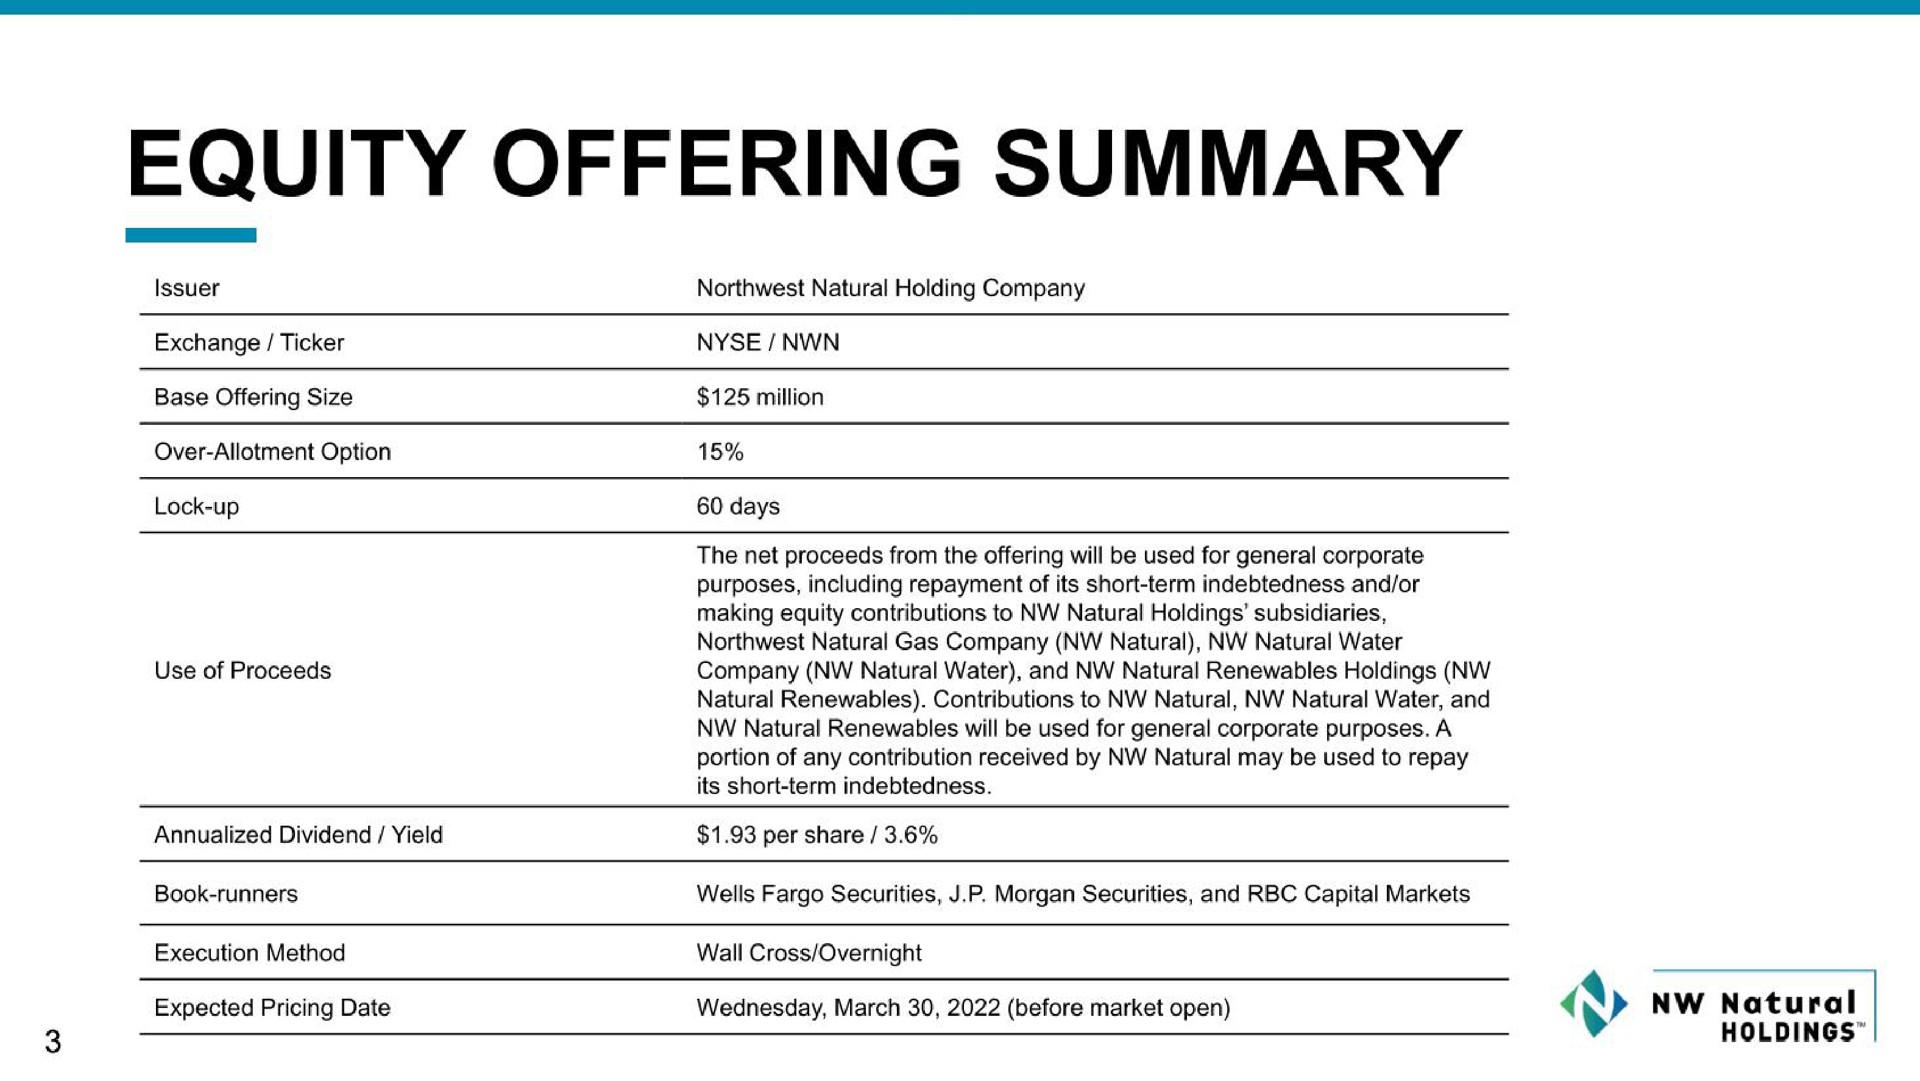 equity offering summary | NW Natural Holdings